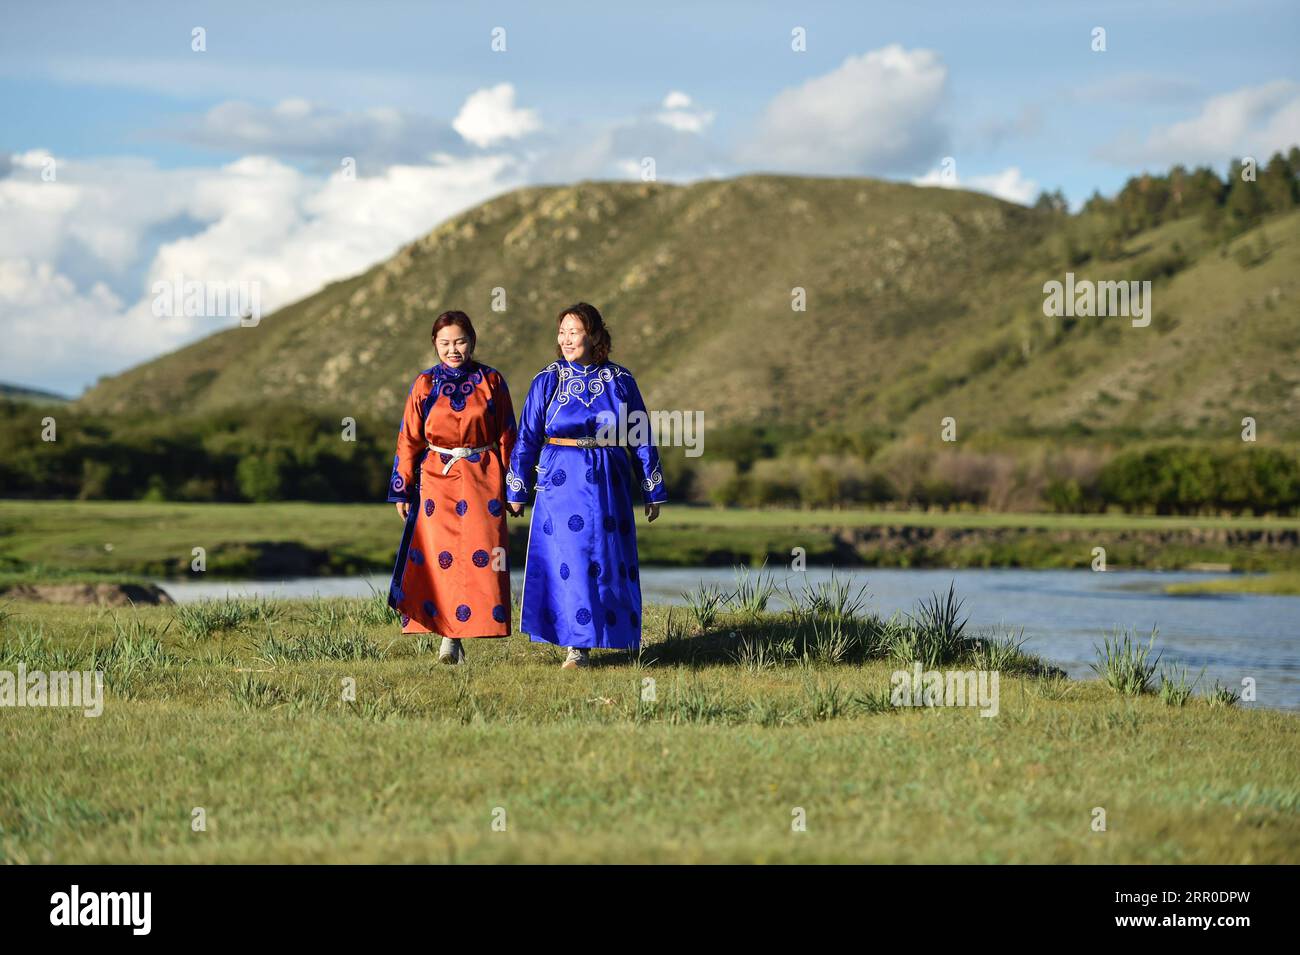 200810 -- HULUN BUIR, Aug. 10, 2020 -- Aijim L and her mother Uran walk along a river in Ewenki Autonomous Banner, north China s Inner Mongolia Autonomous Region, Aug. 6, 2020. Aijim is a post-90s girl of Ewenki ethnic group living in Inner Mongolia Autonomous Region. In 2014, she returned to her hometown at Ewenki Autonomous Banner, Hulun Buir City, after graduation from university, and helped her mother Uran run a handicraft studio. They make handicrafts themed on Sun Flower , and opened up online business to sell the products. Behind the handicrafts we made is the folk story of Sun Girl who Stock Photo